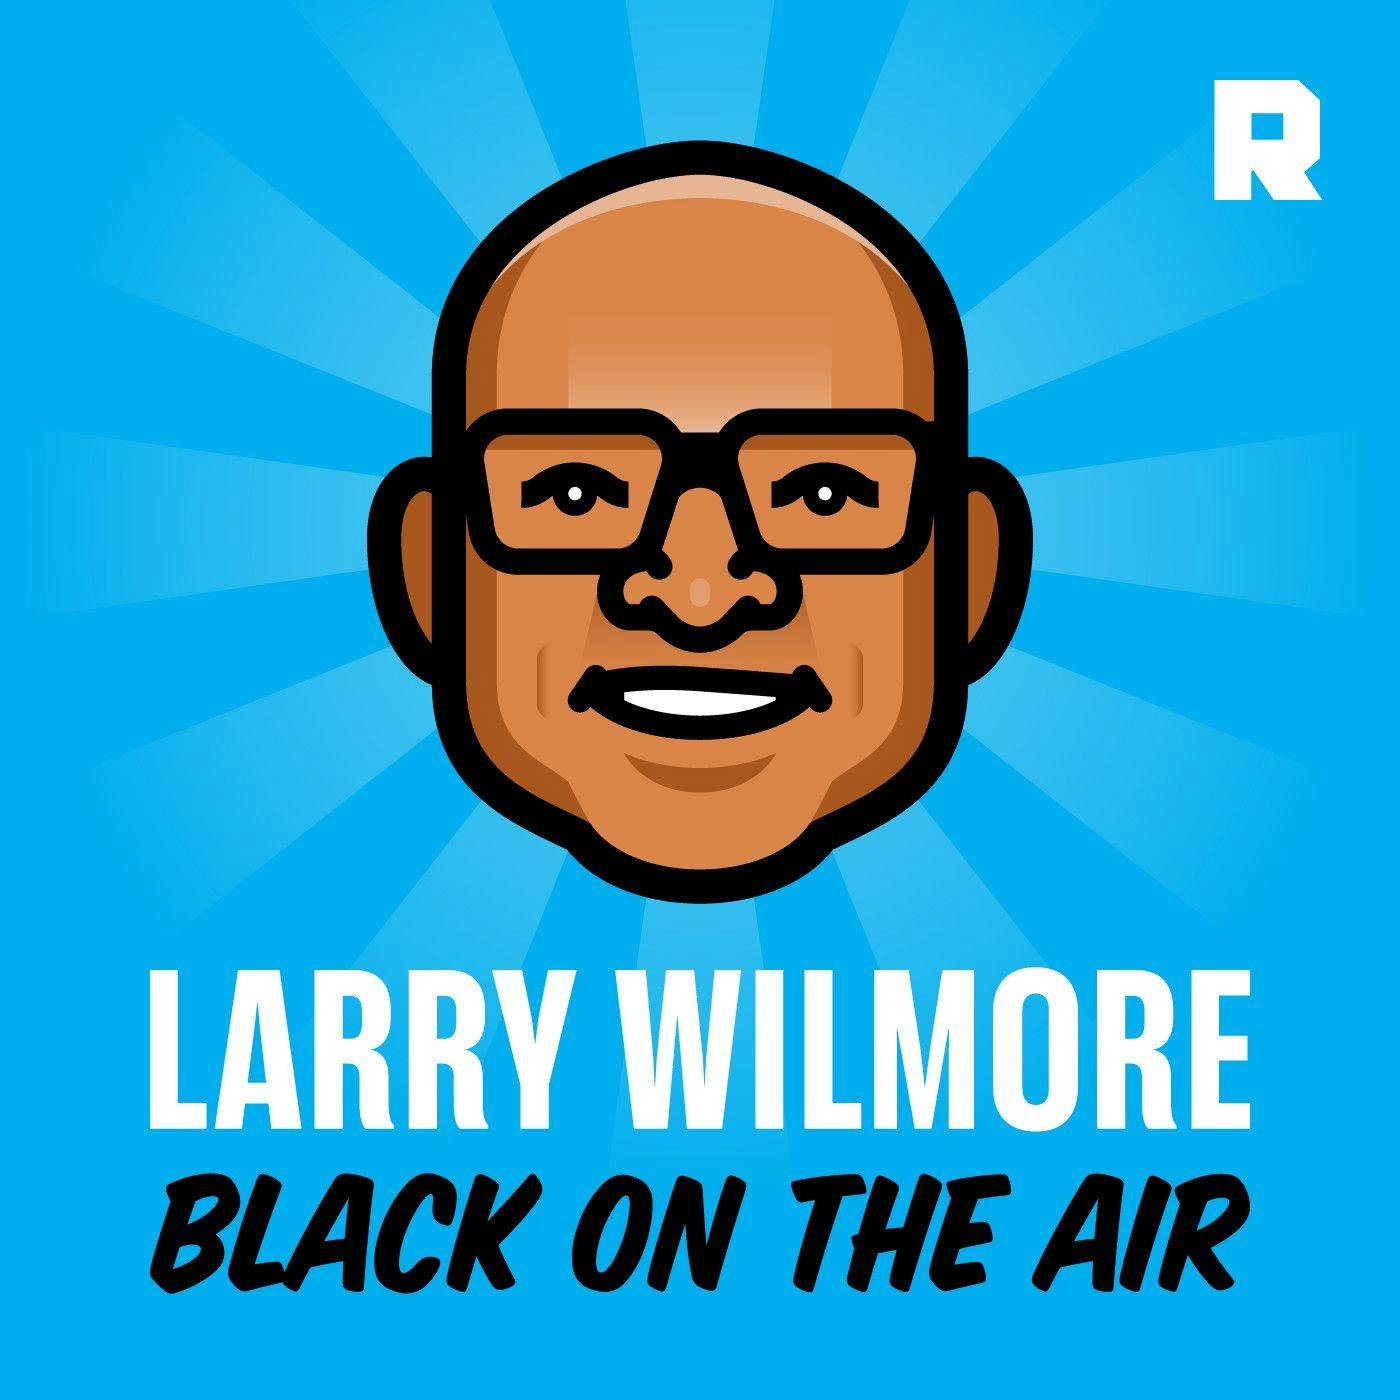 Historian Doris Kearns Goodwin Looks to the Presidents of the Past to Understand the Politics of Today | Larry Wilmore (Ep. 54)